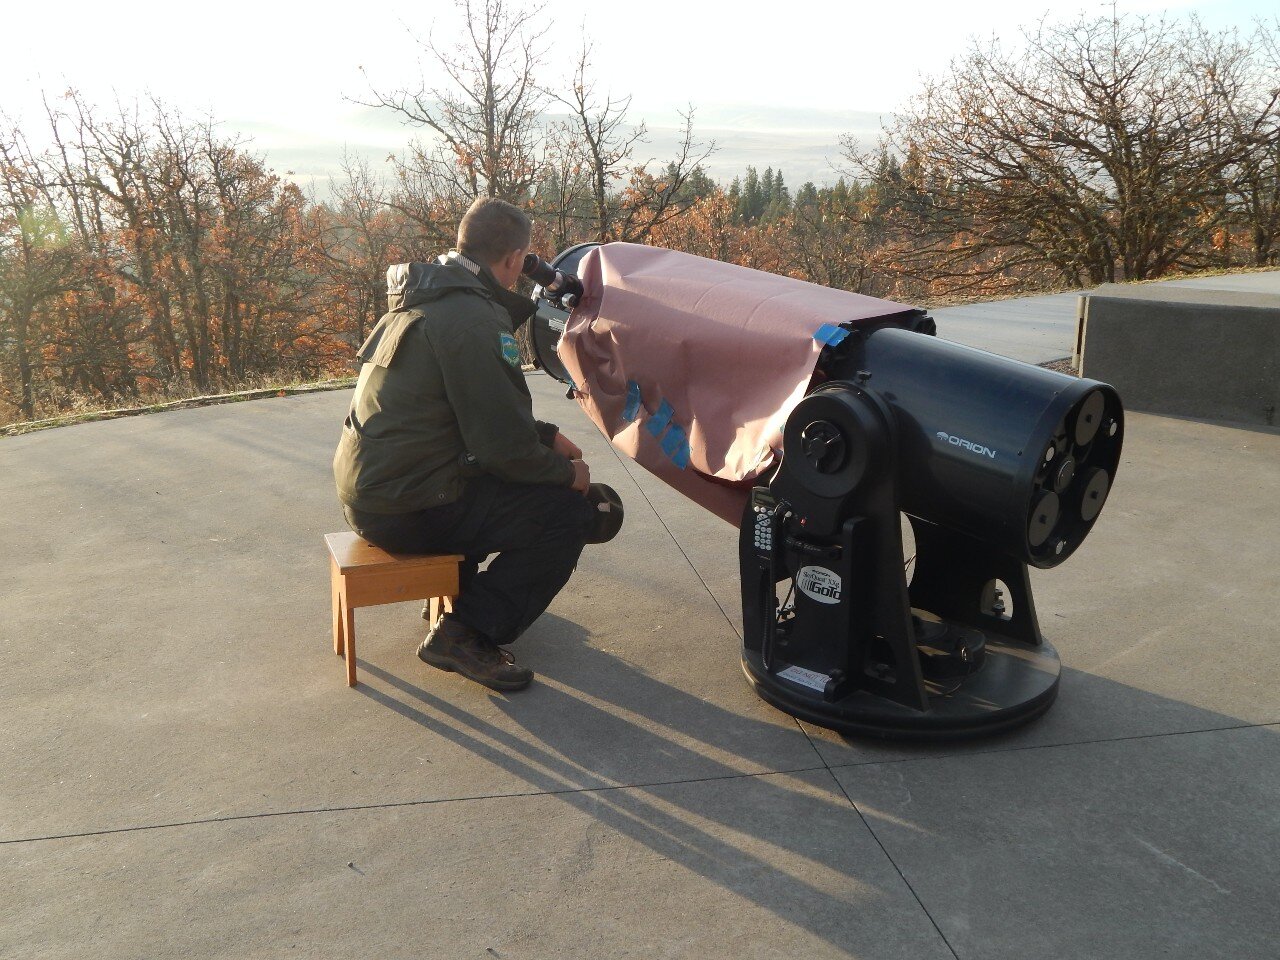  Looking at the sun via telescope w/ proper eye protection at GOSP, Nov, 2019, by Dee Caputo 